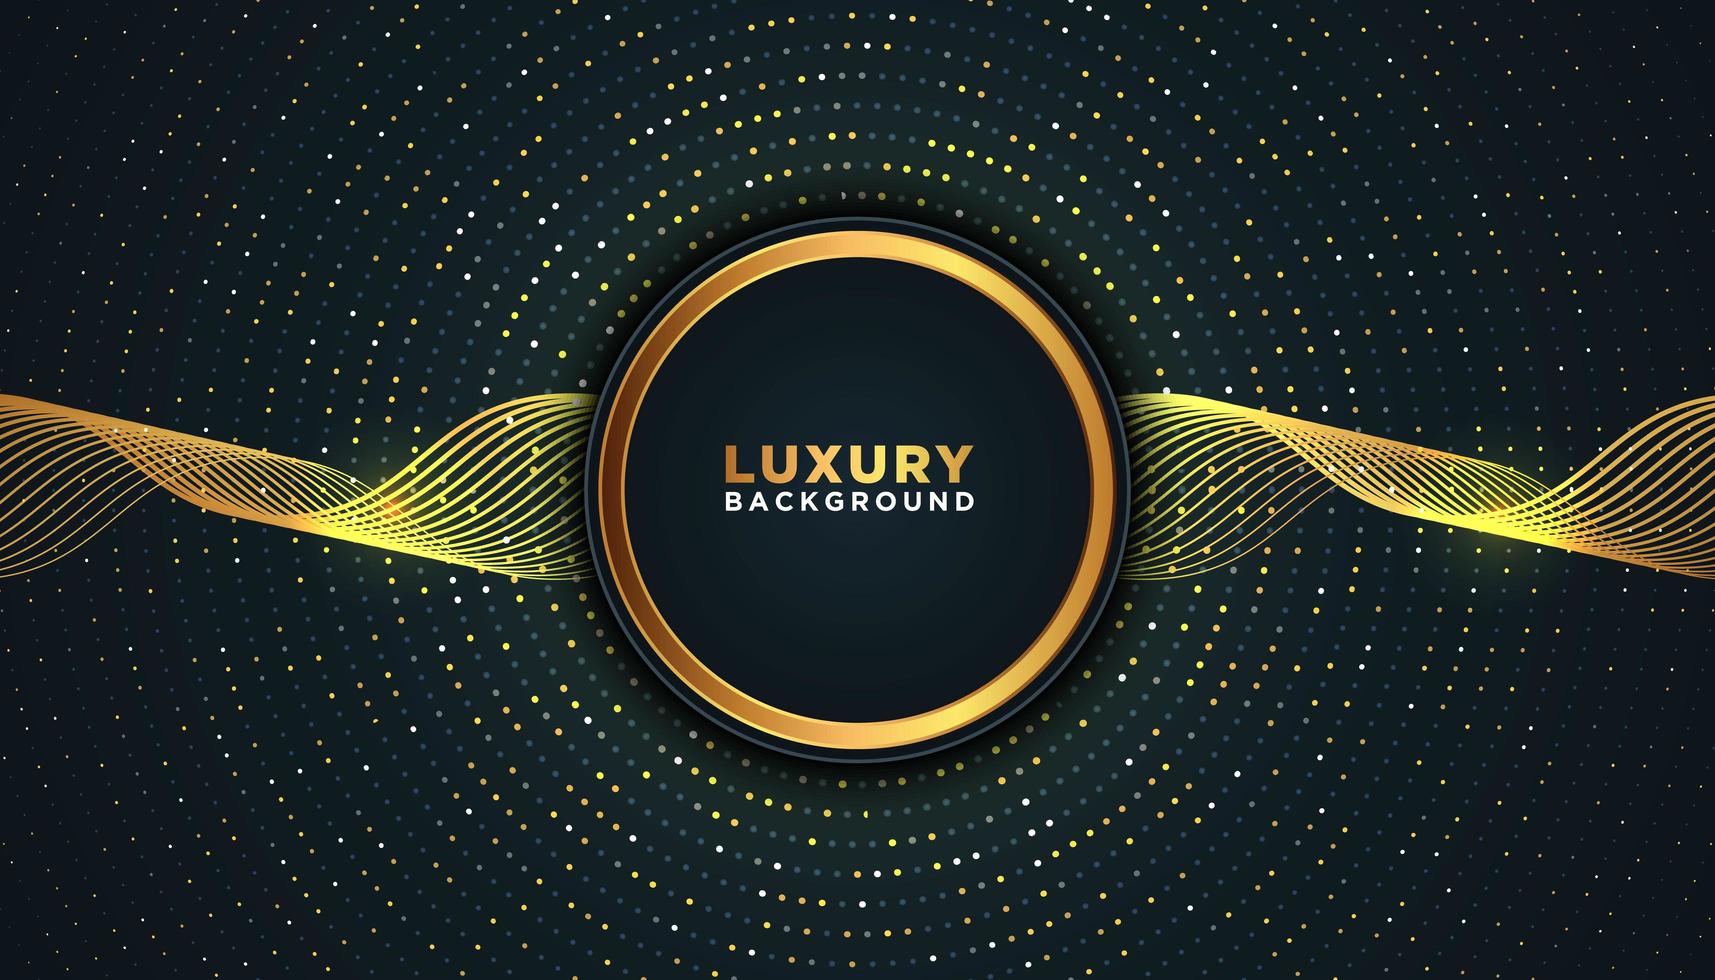 Dark Luxury Background with Radial Gold Dots vector